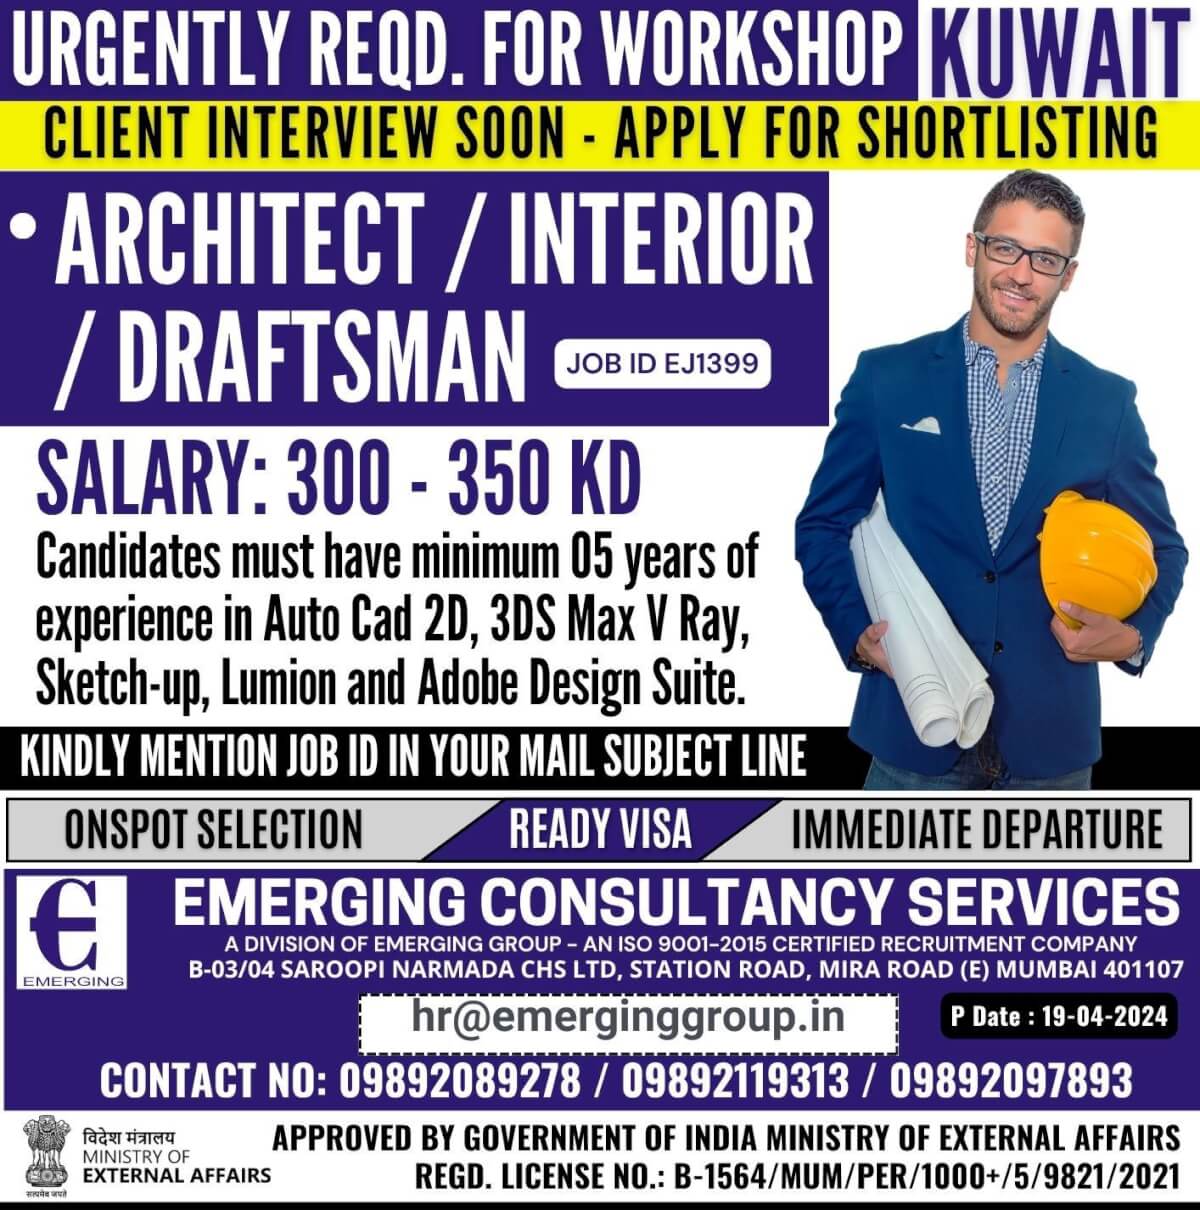 URGENTLY REQD. FOR WORKSHOP IN KUWAIT - CLIENT INTERVIEW SOON - SHORTLISTING IN PROCESS.